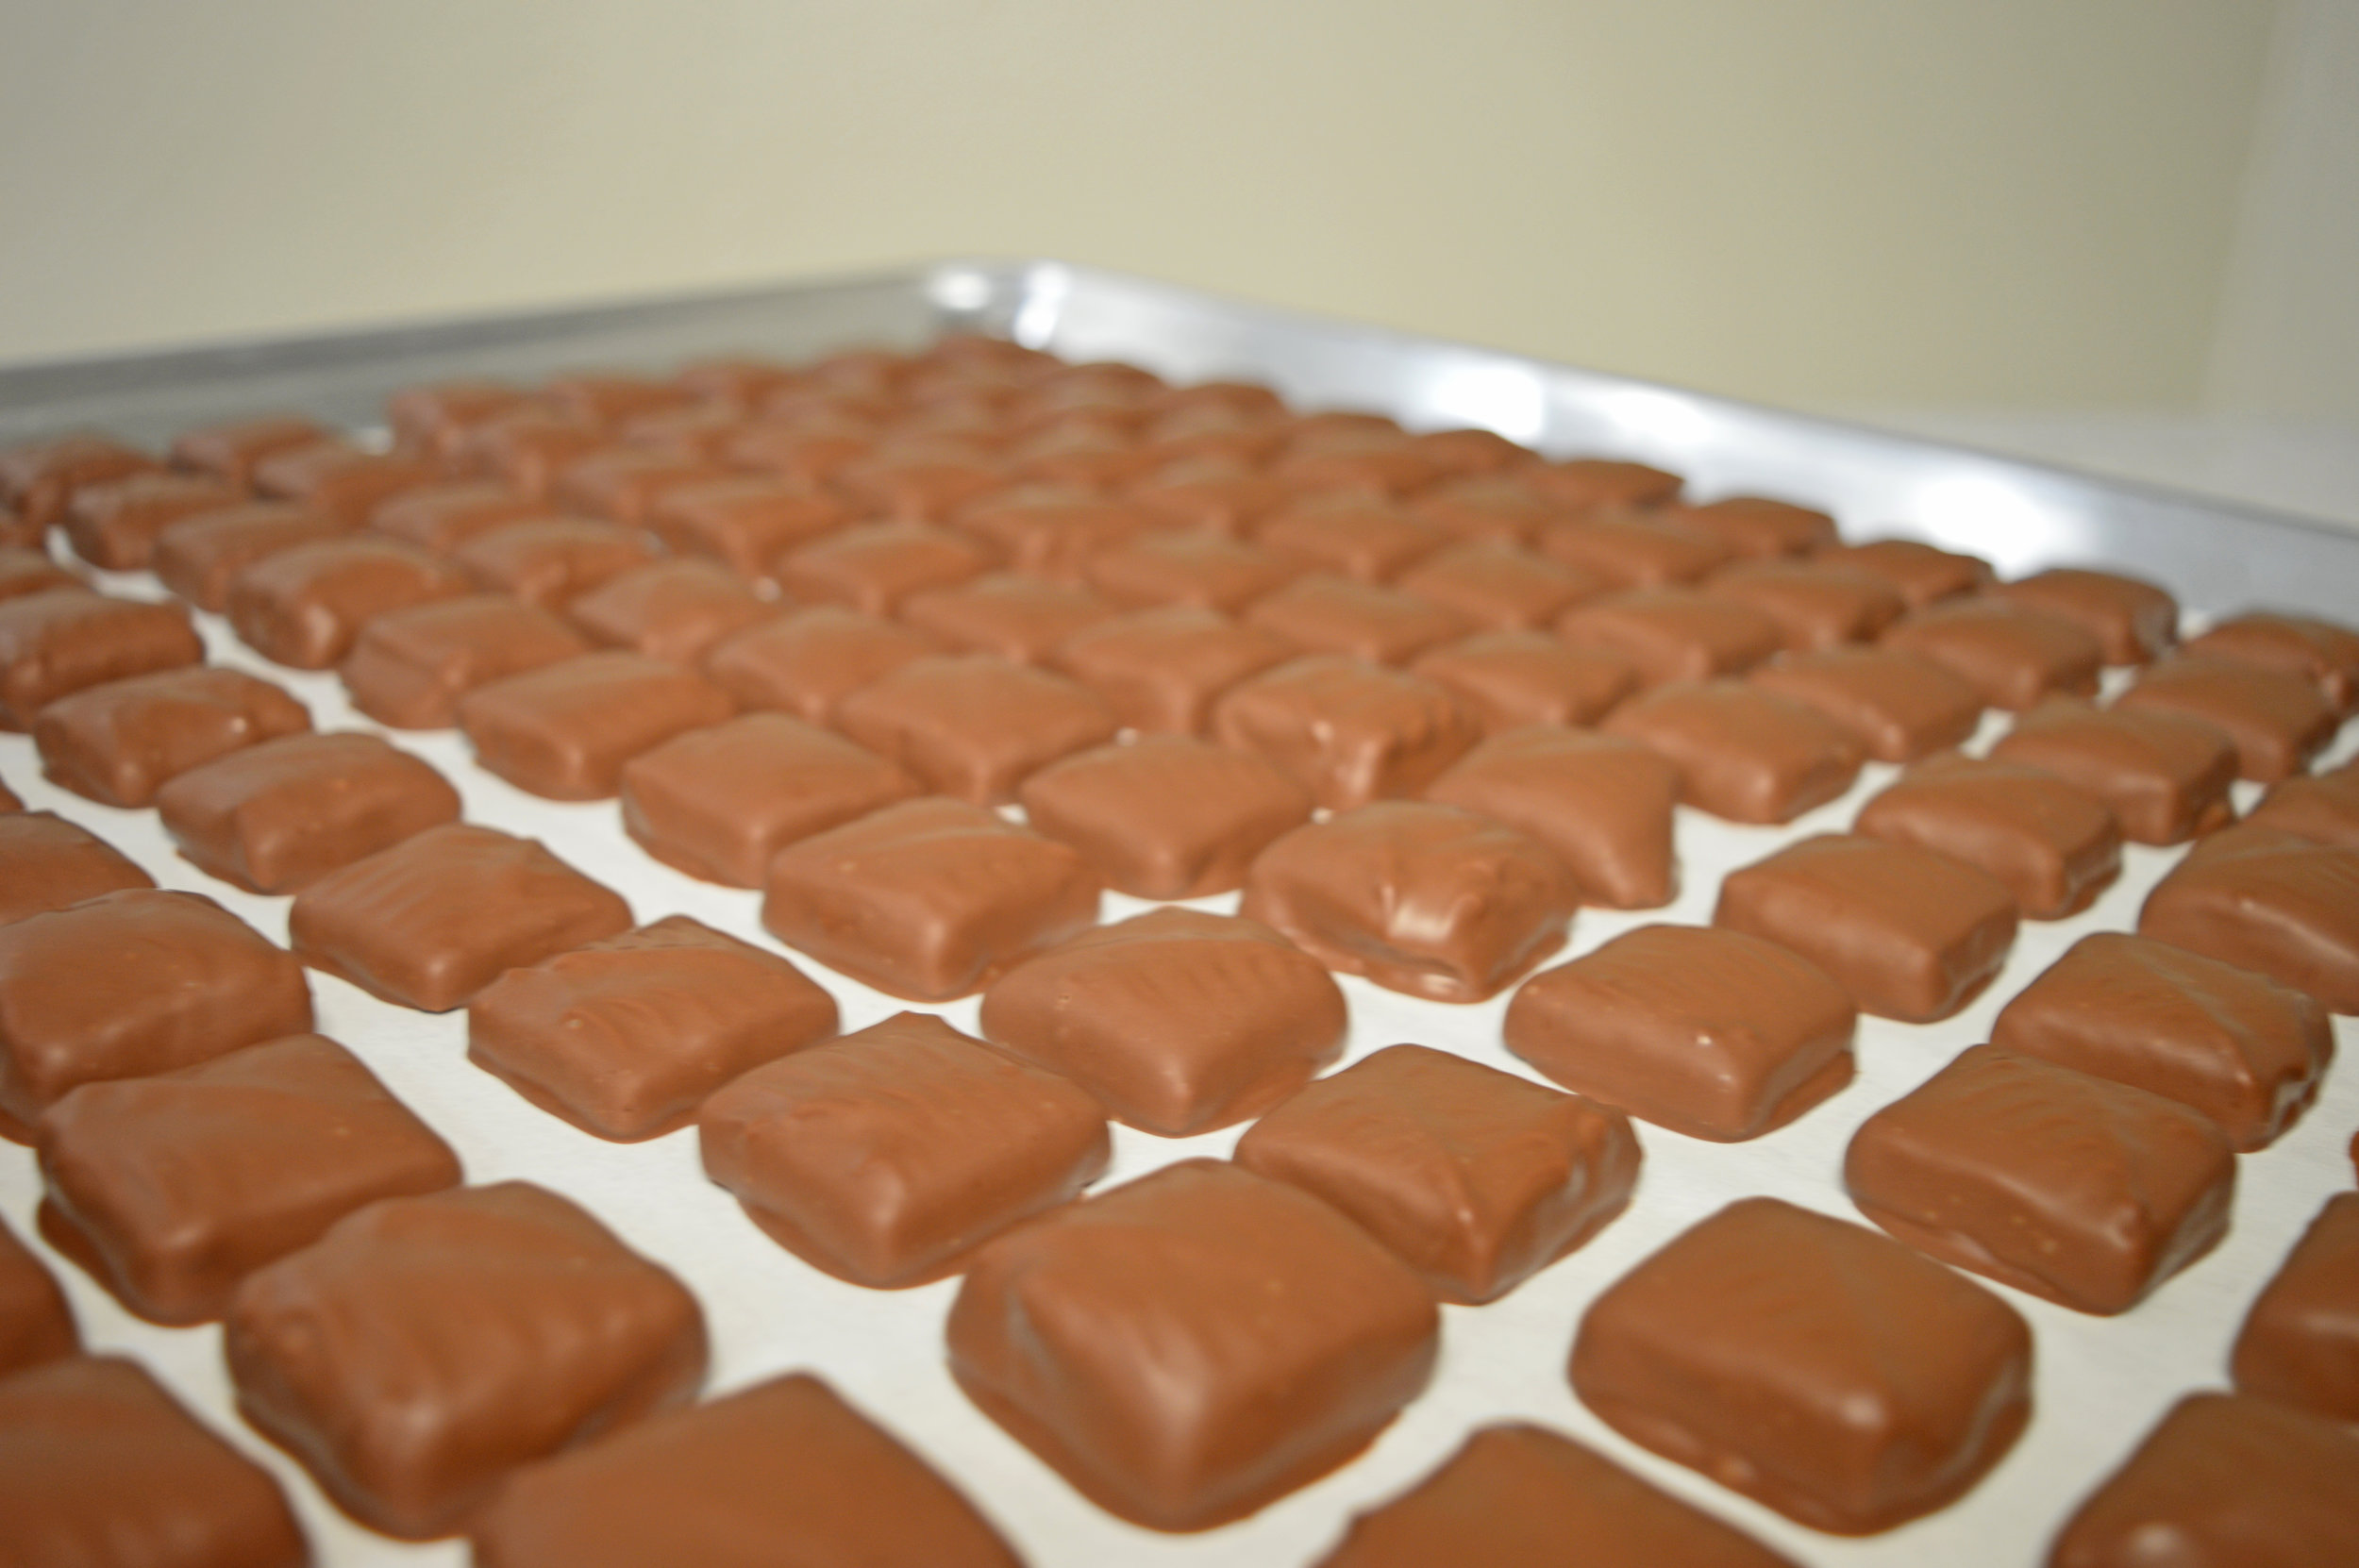 Tray of milk chocolate Belle toffee